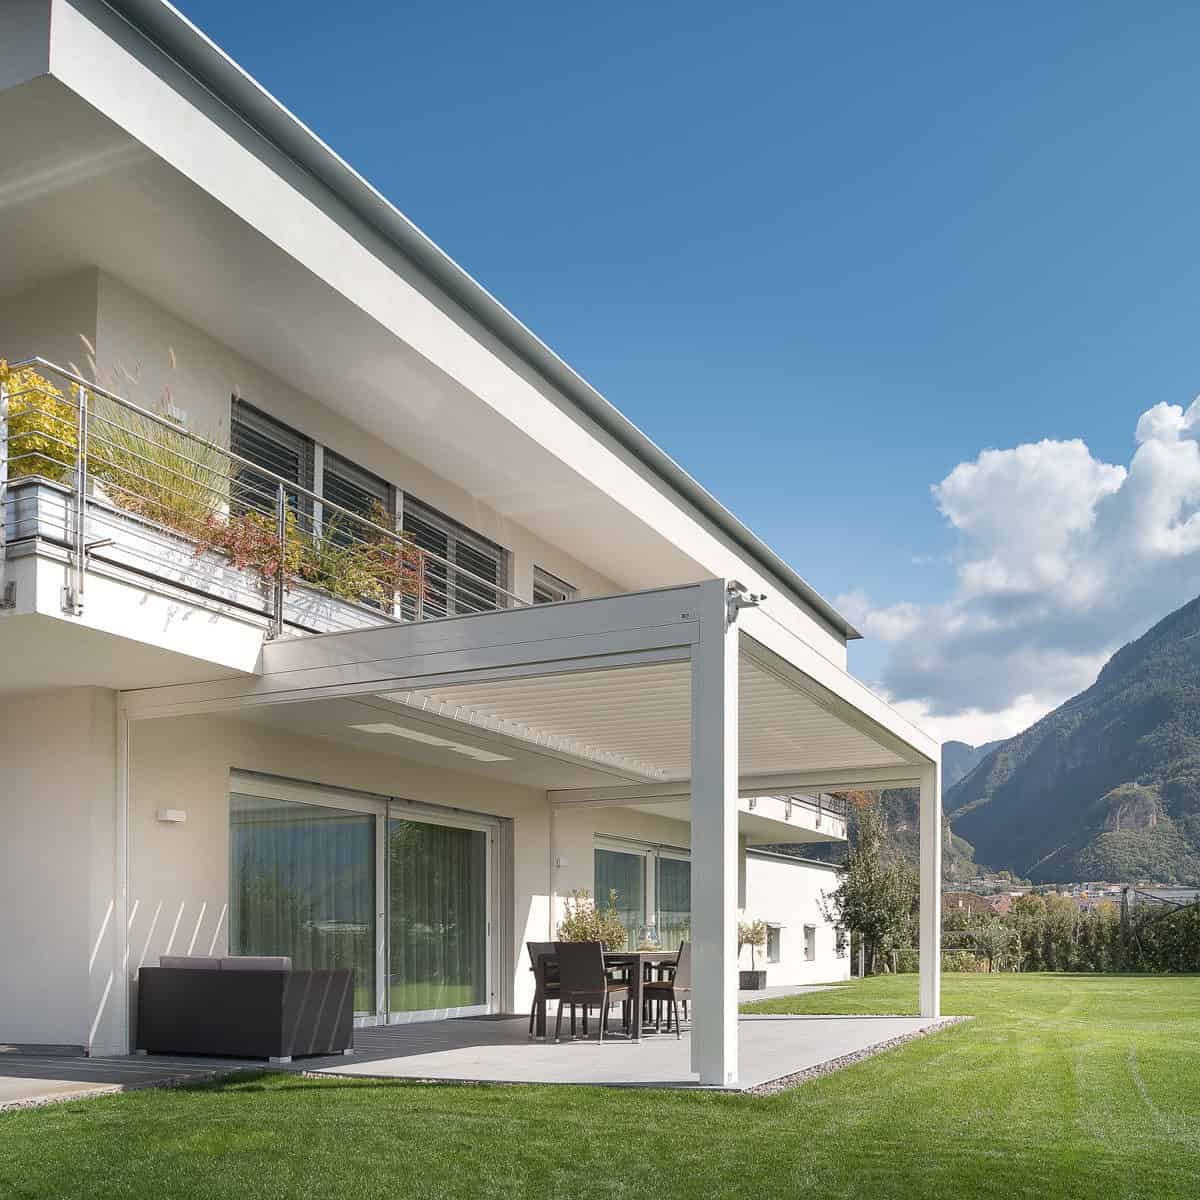 This image showcases a KE Kedry Prime louvred roof pergola in white, wall mounted over a patio area. With its sleek and stylish design, the Kedry Prime pergola not only adds an attractive element to the outdoor space but also provides practical benefits with its adjustable louvres, allowing you to control the amount of sunlight and shade. The white color of the pergola blends seamlessly with the patio and surrounding landscaping, creating a unified and cohesive outdoor living space. The wall-mounted design maximizes space efficiency and ensures the pergola doesn't take up valuable floor space on the patio. With the KE Kedry Prime louvred roof pergola, you can enjoy your outdoor space in comfort and style, no matter the weather.